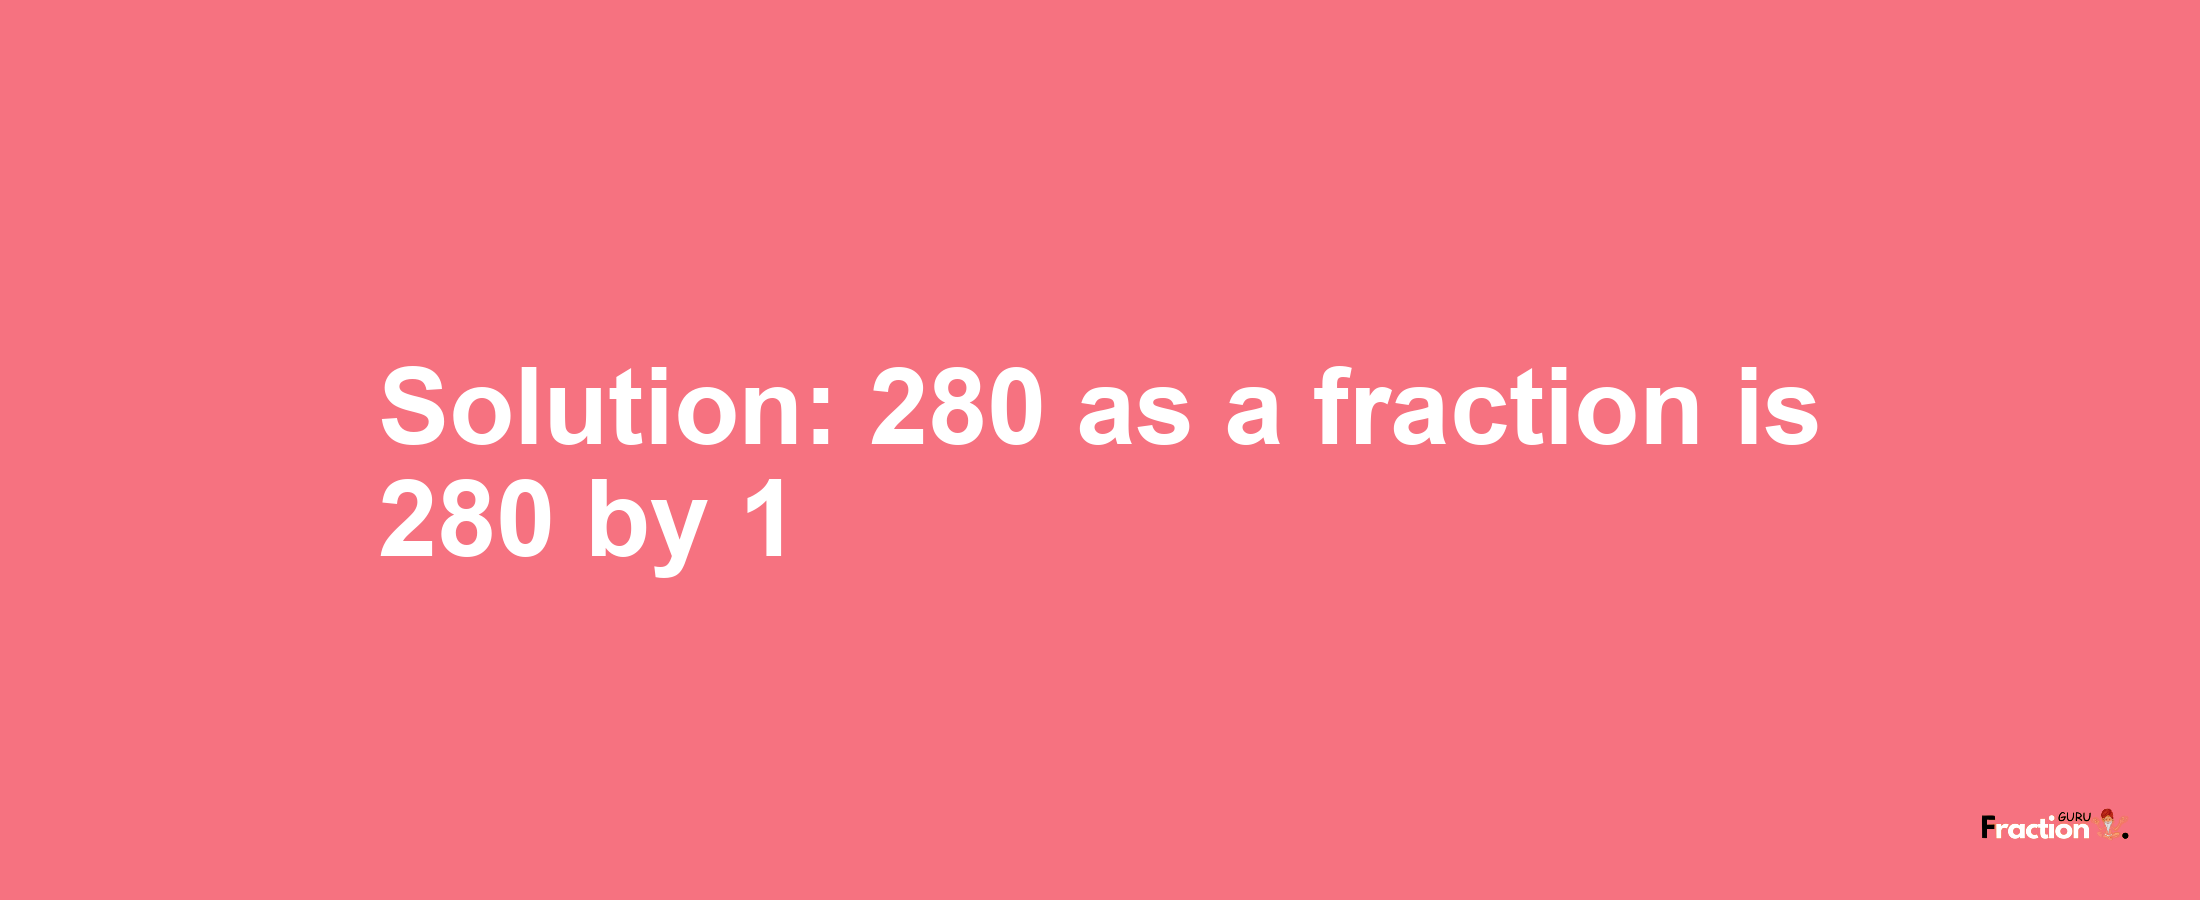 Solution:280 as a fraction is 280/1